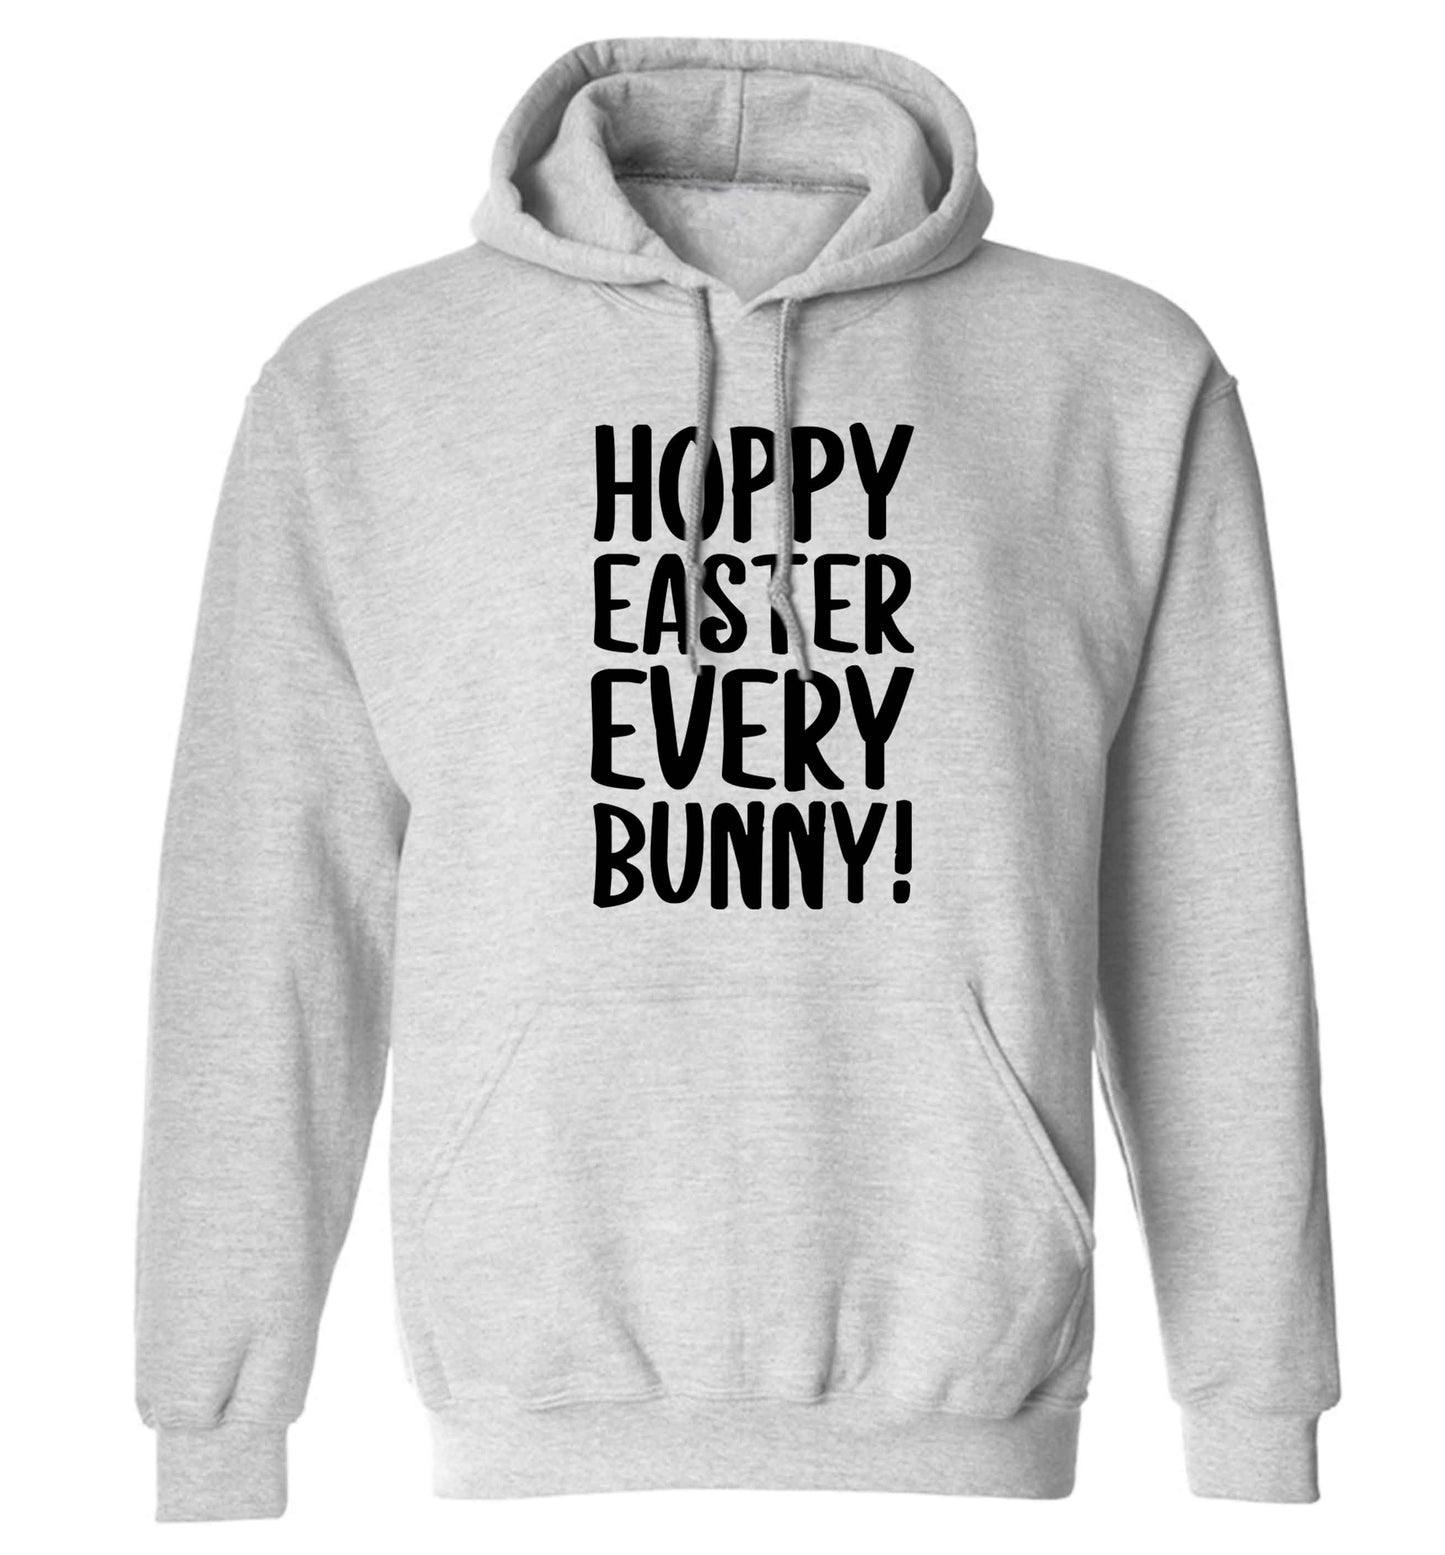 Hoppy Easter every bunny! adults unisex grey hoodie 2XL